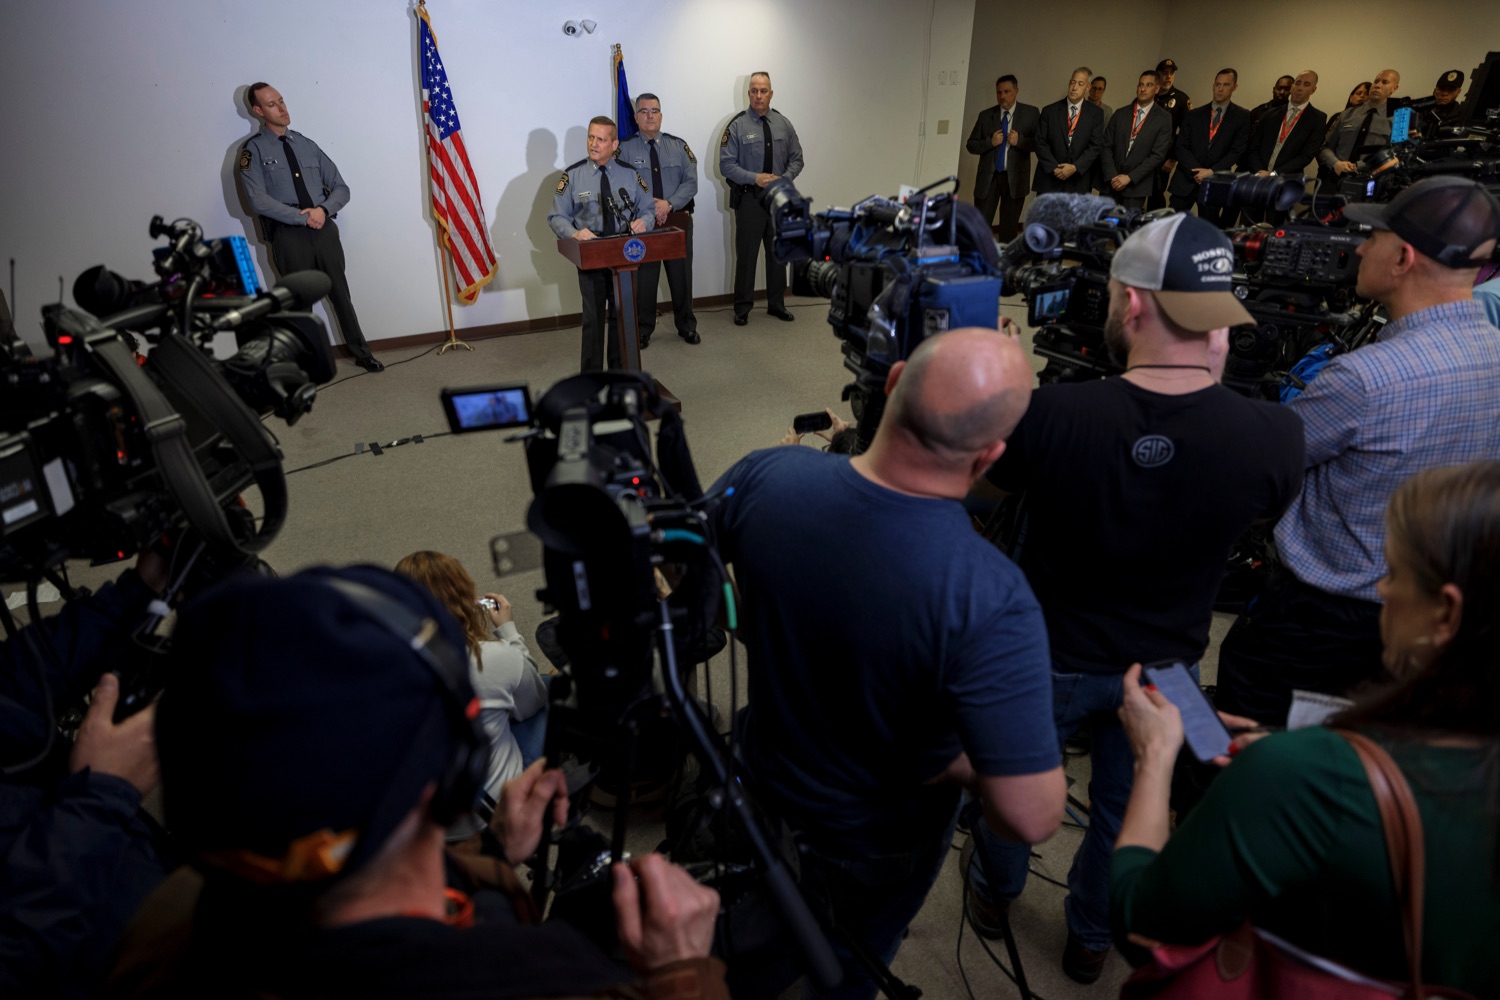 Colonel Robert Evanchick, Commissioner of the Pennsylvania State Police, speaks during a press conference to discuss the apprehension of Bryan C. Kohberger inside Monroe County District Attorney Office in Stroudsburg on Tuesday, January 3, 2023. Kohberger was taken into custody early Friday by members of Troop N and the Special Emergency Response Team at a home in Chestnuthill Township, in Monroe County, in connection to the homicides of four University of Idaho students on November 13.<br><a href="https://filesource.amperwave.net/commonwealthofpa/photo/22481_PSP_Kohberger_NK_003.JPG" target="_blank">⇣ Download Photo</a>